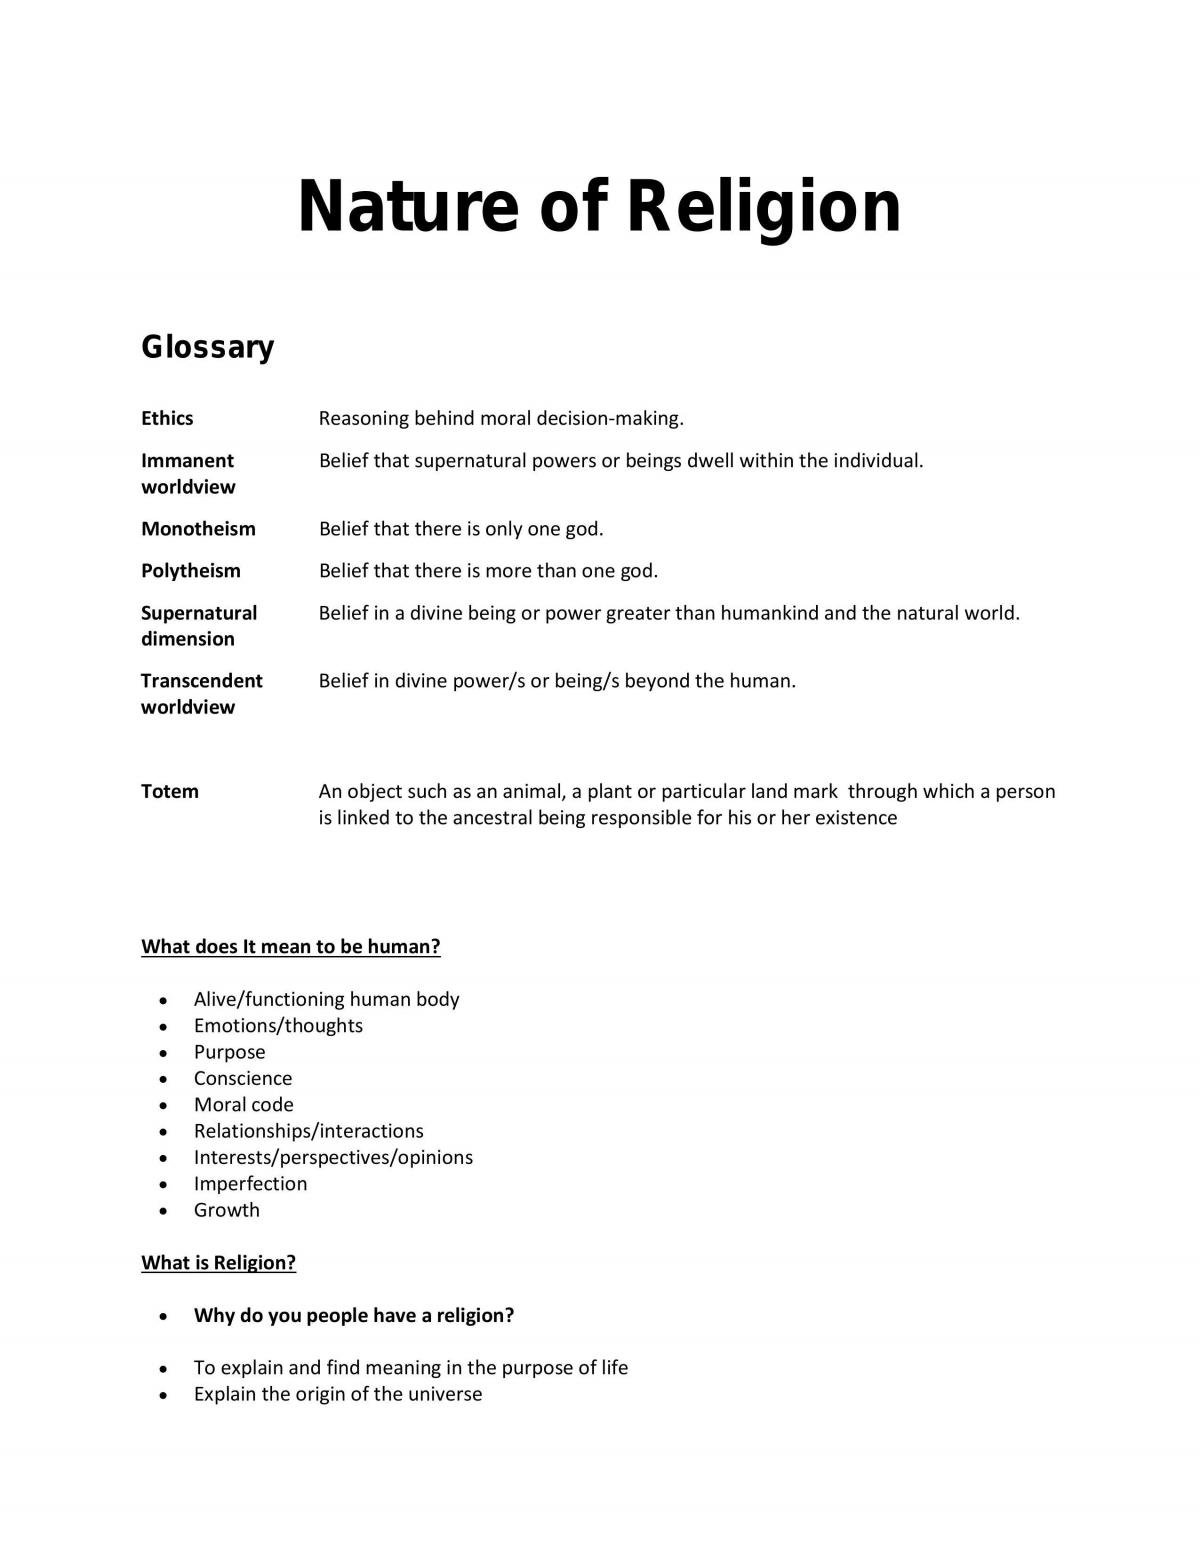 the nature of religion essay